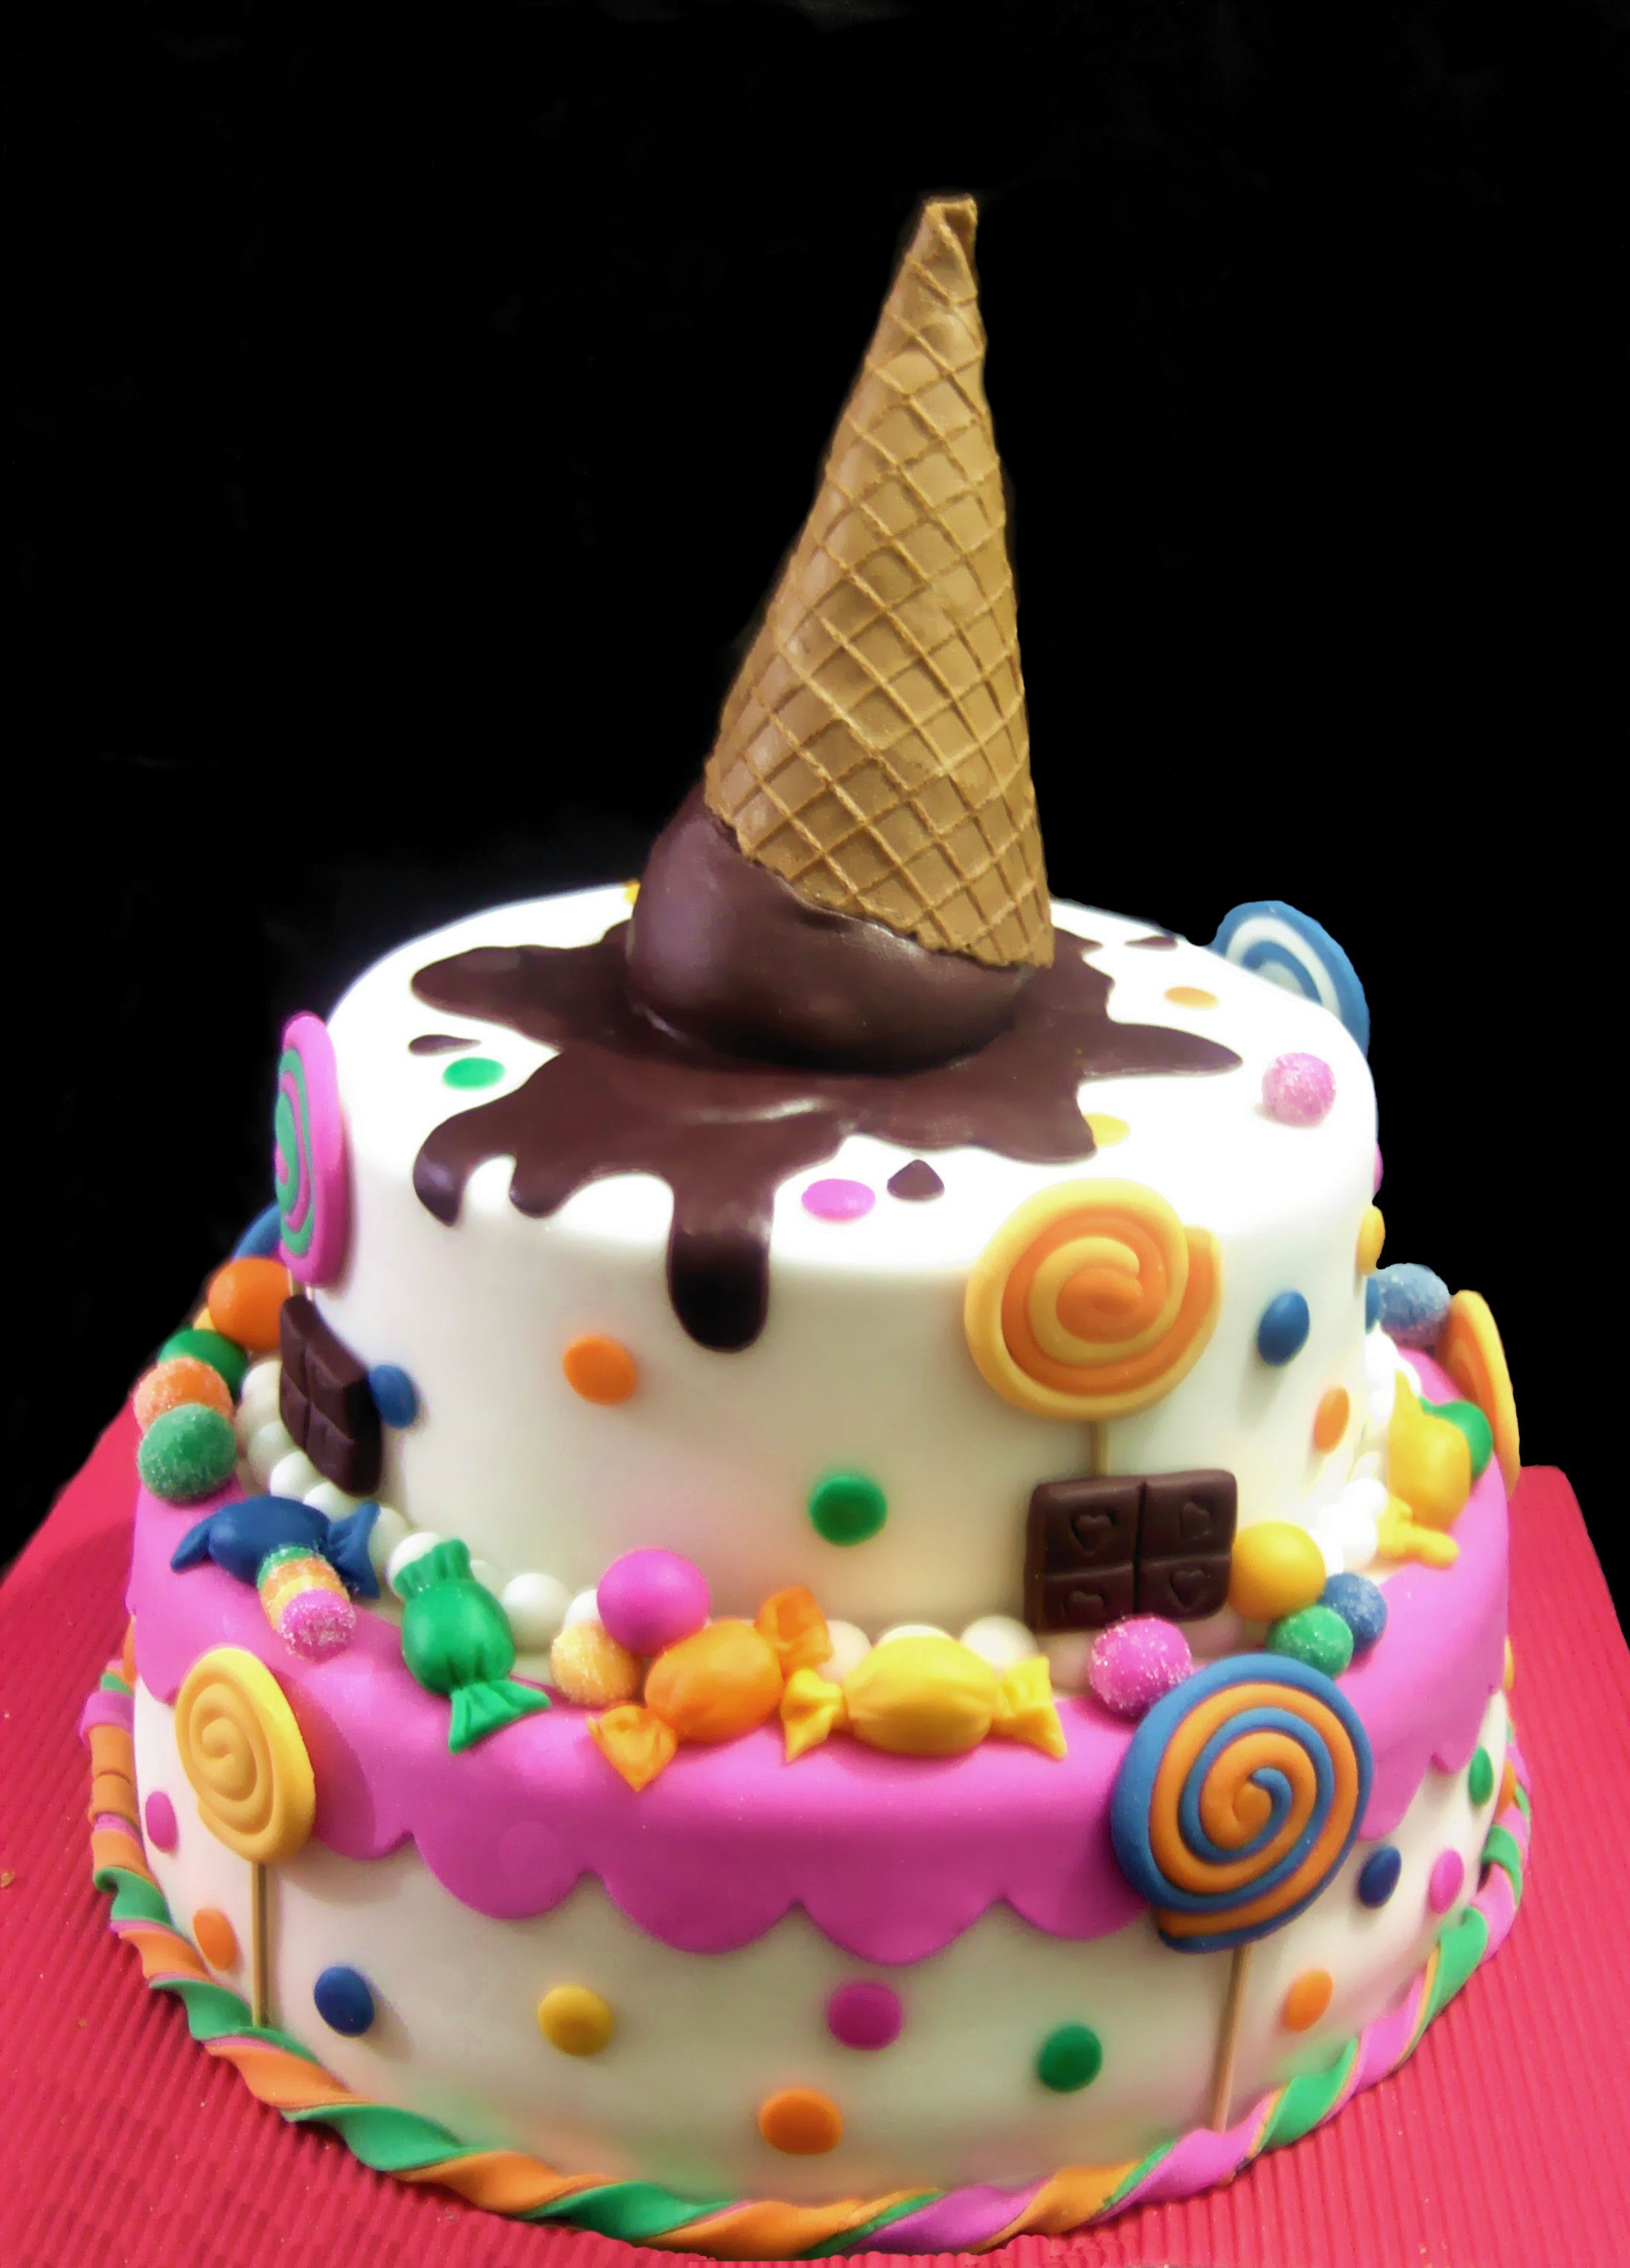 Cute Birthday Cakes For Girl Super Cute For A Little Girls Cake Cakes Cake Birthday Cake